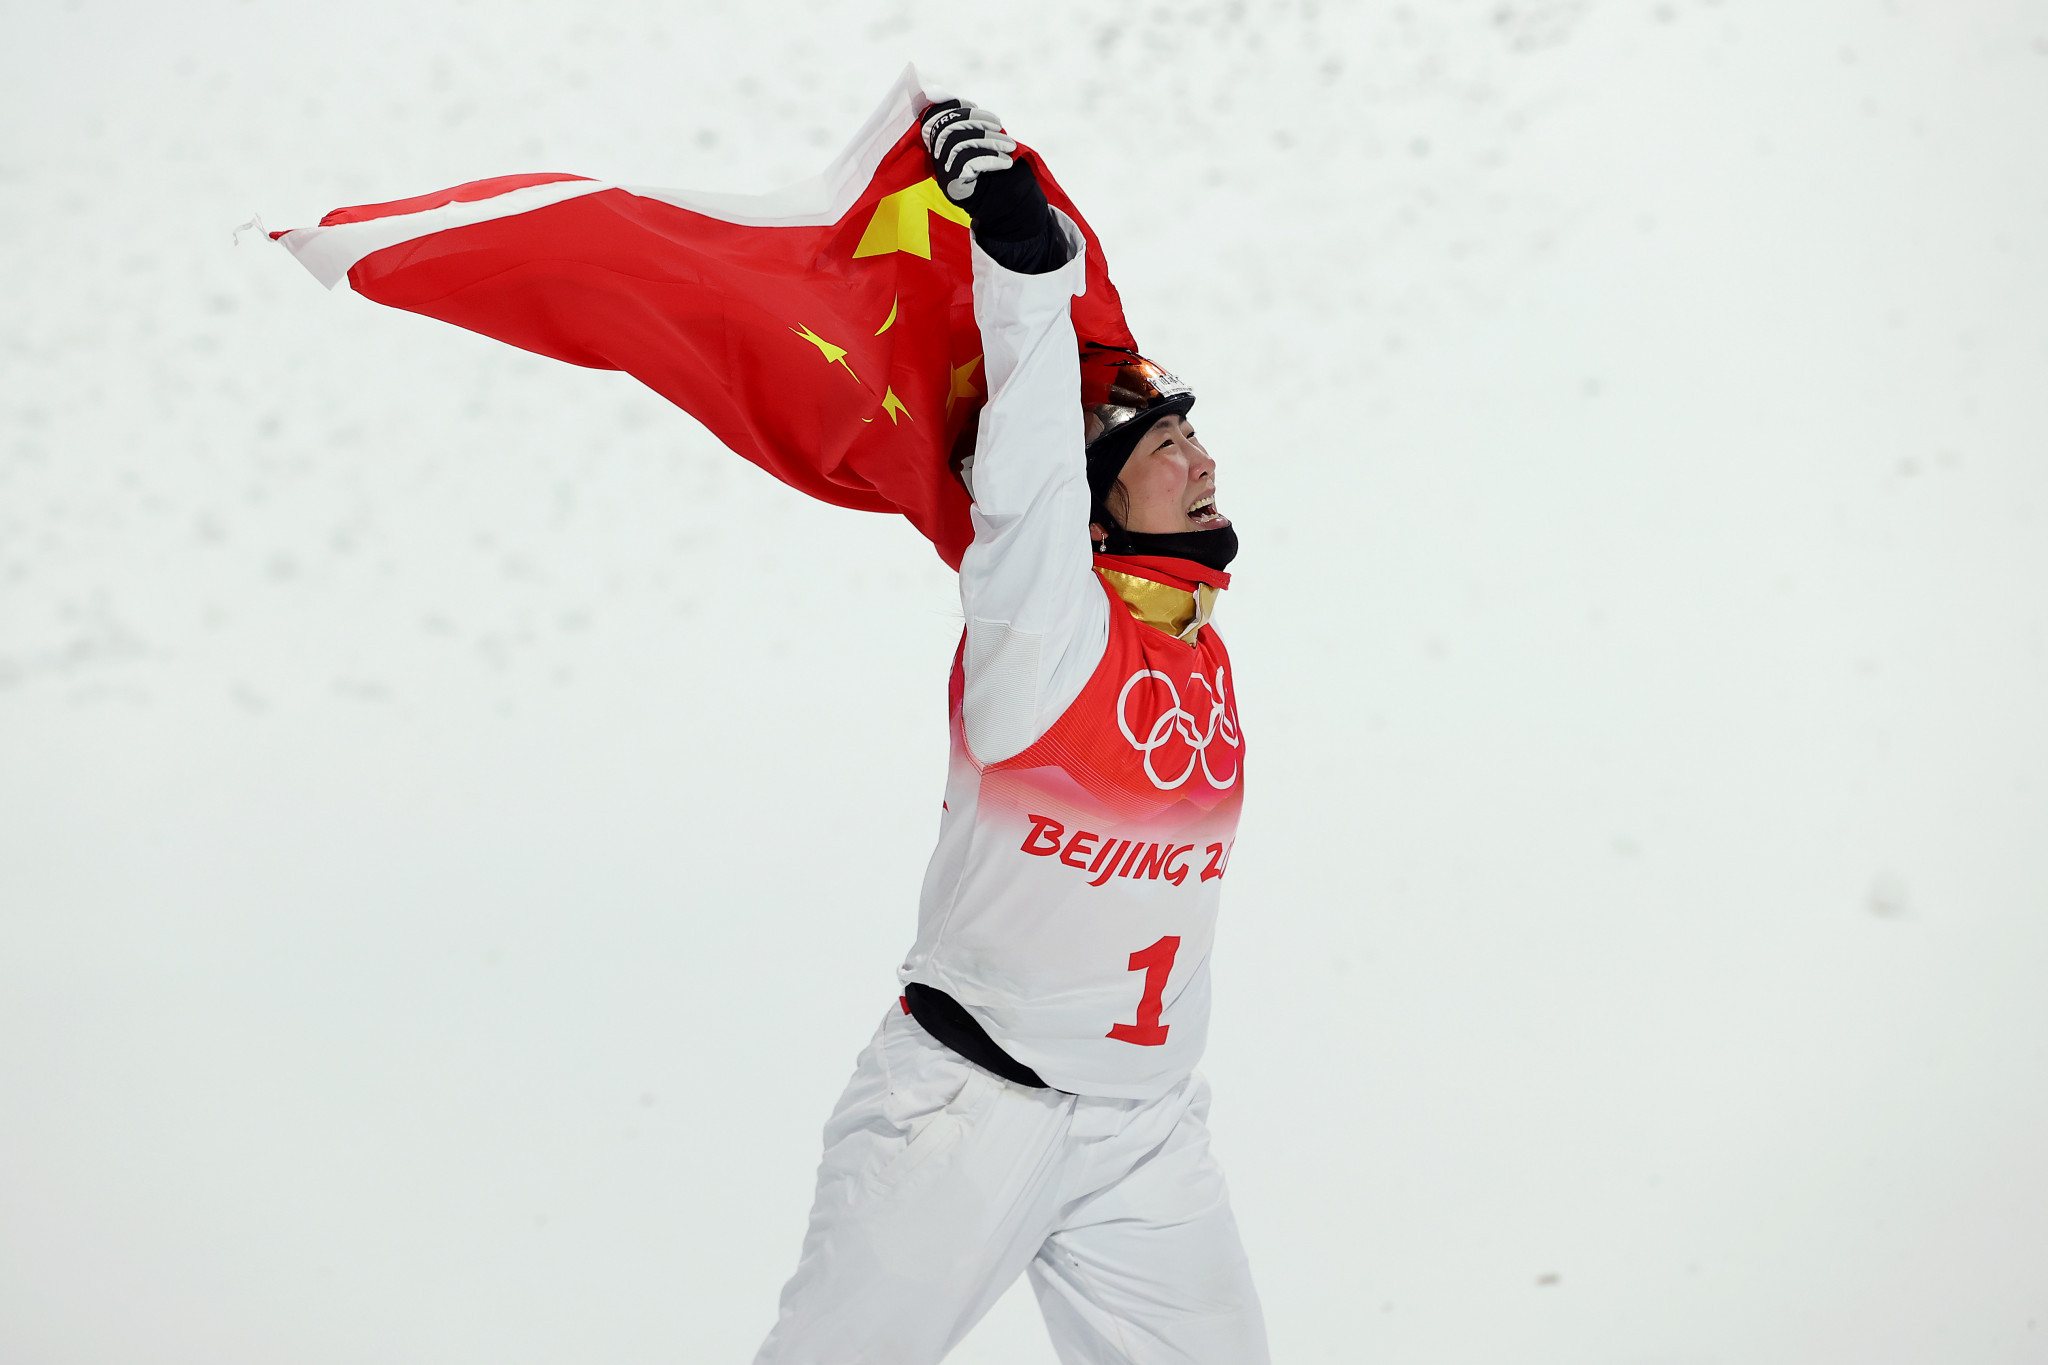 Xu Mengtao following her gold medal winning performance in Beijing 2022 ©Getty Images